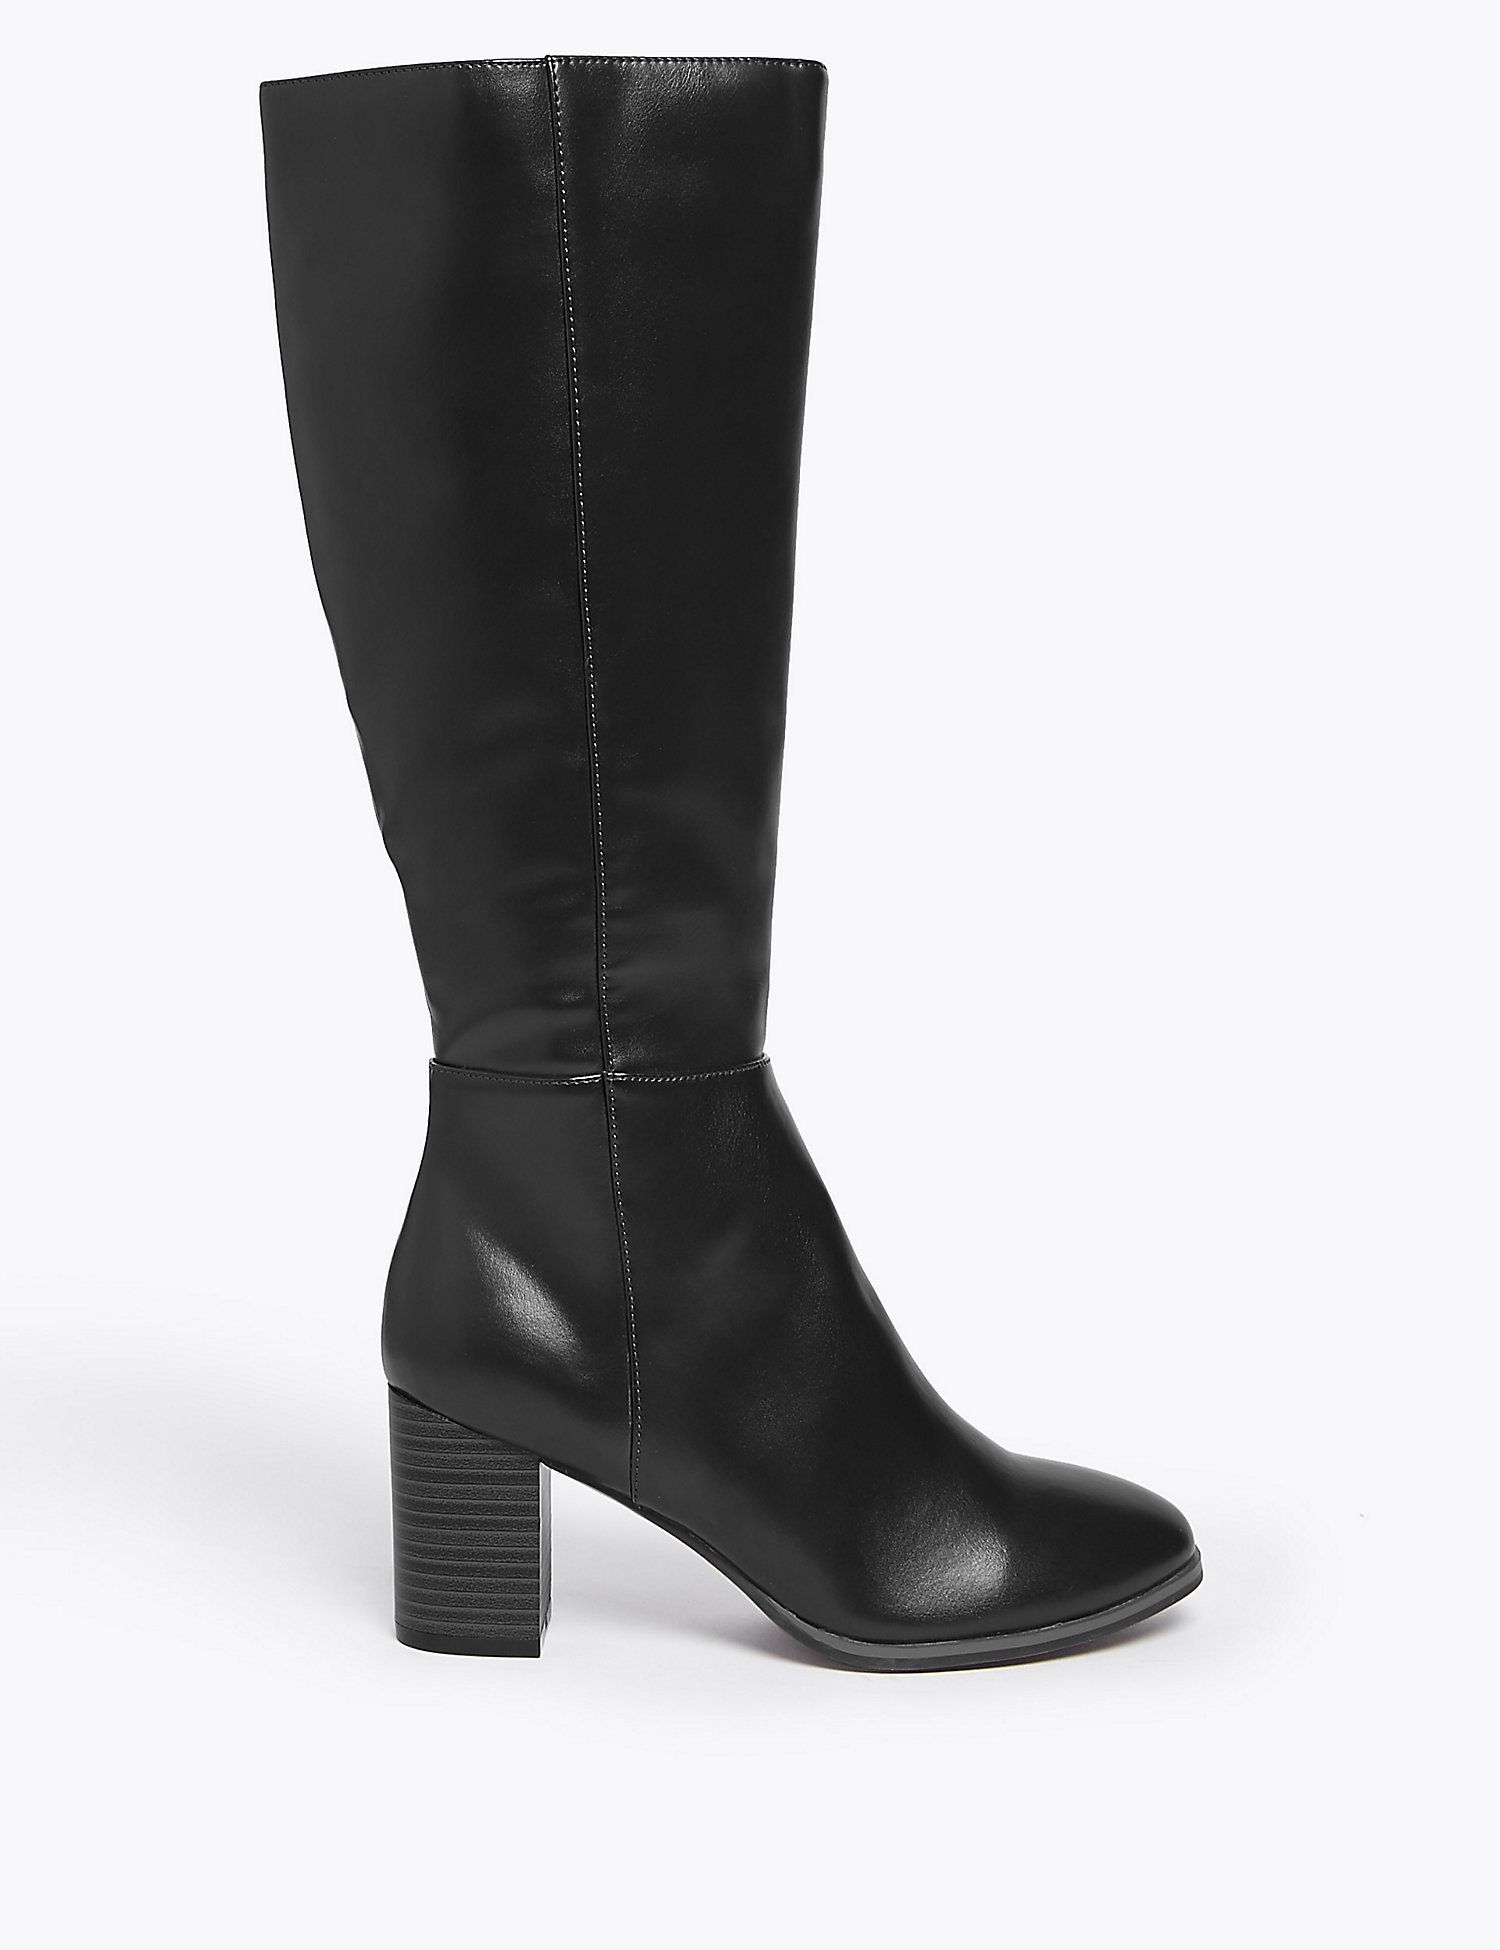 m&s leather boots